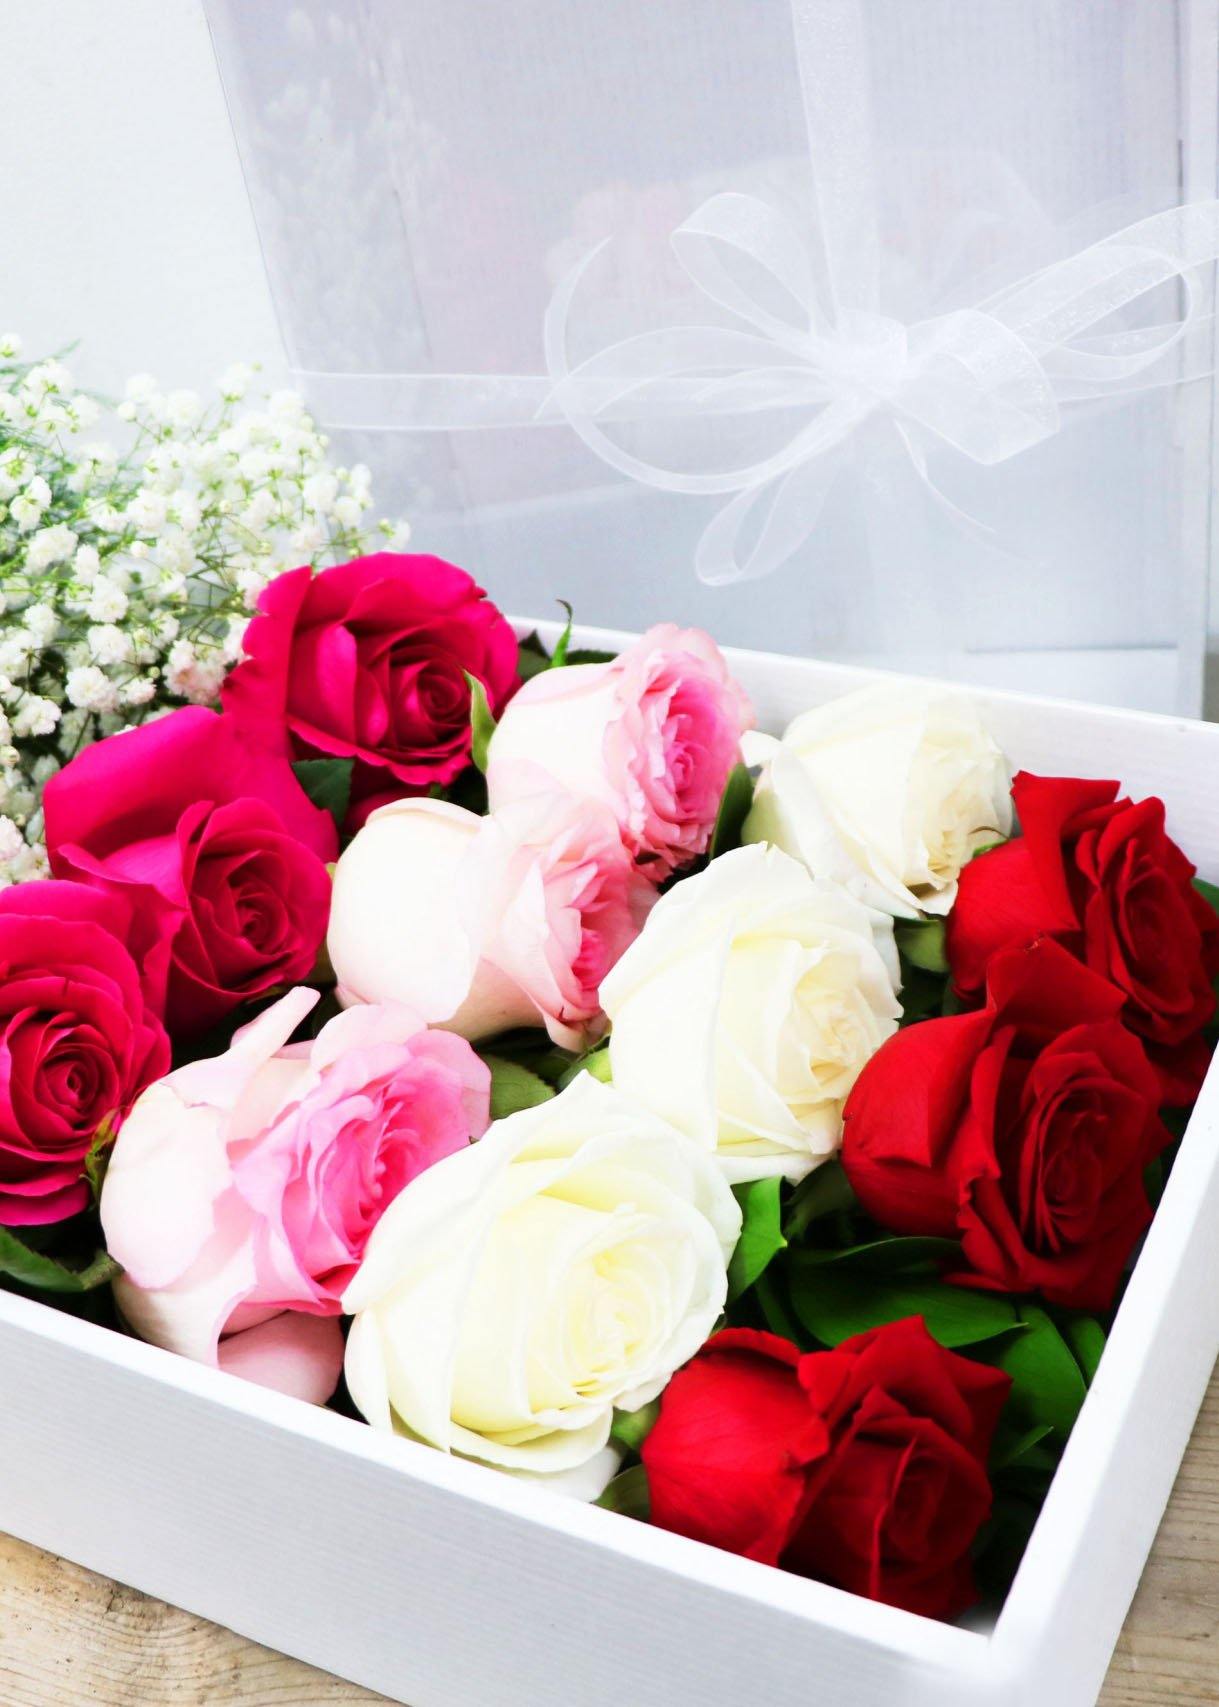 12 Mixed Roses in a Box (including Red Roses - Toronto Flower Gallery